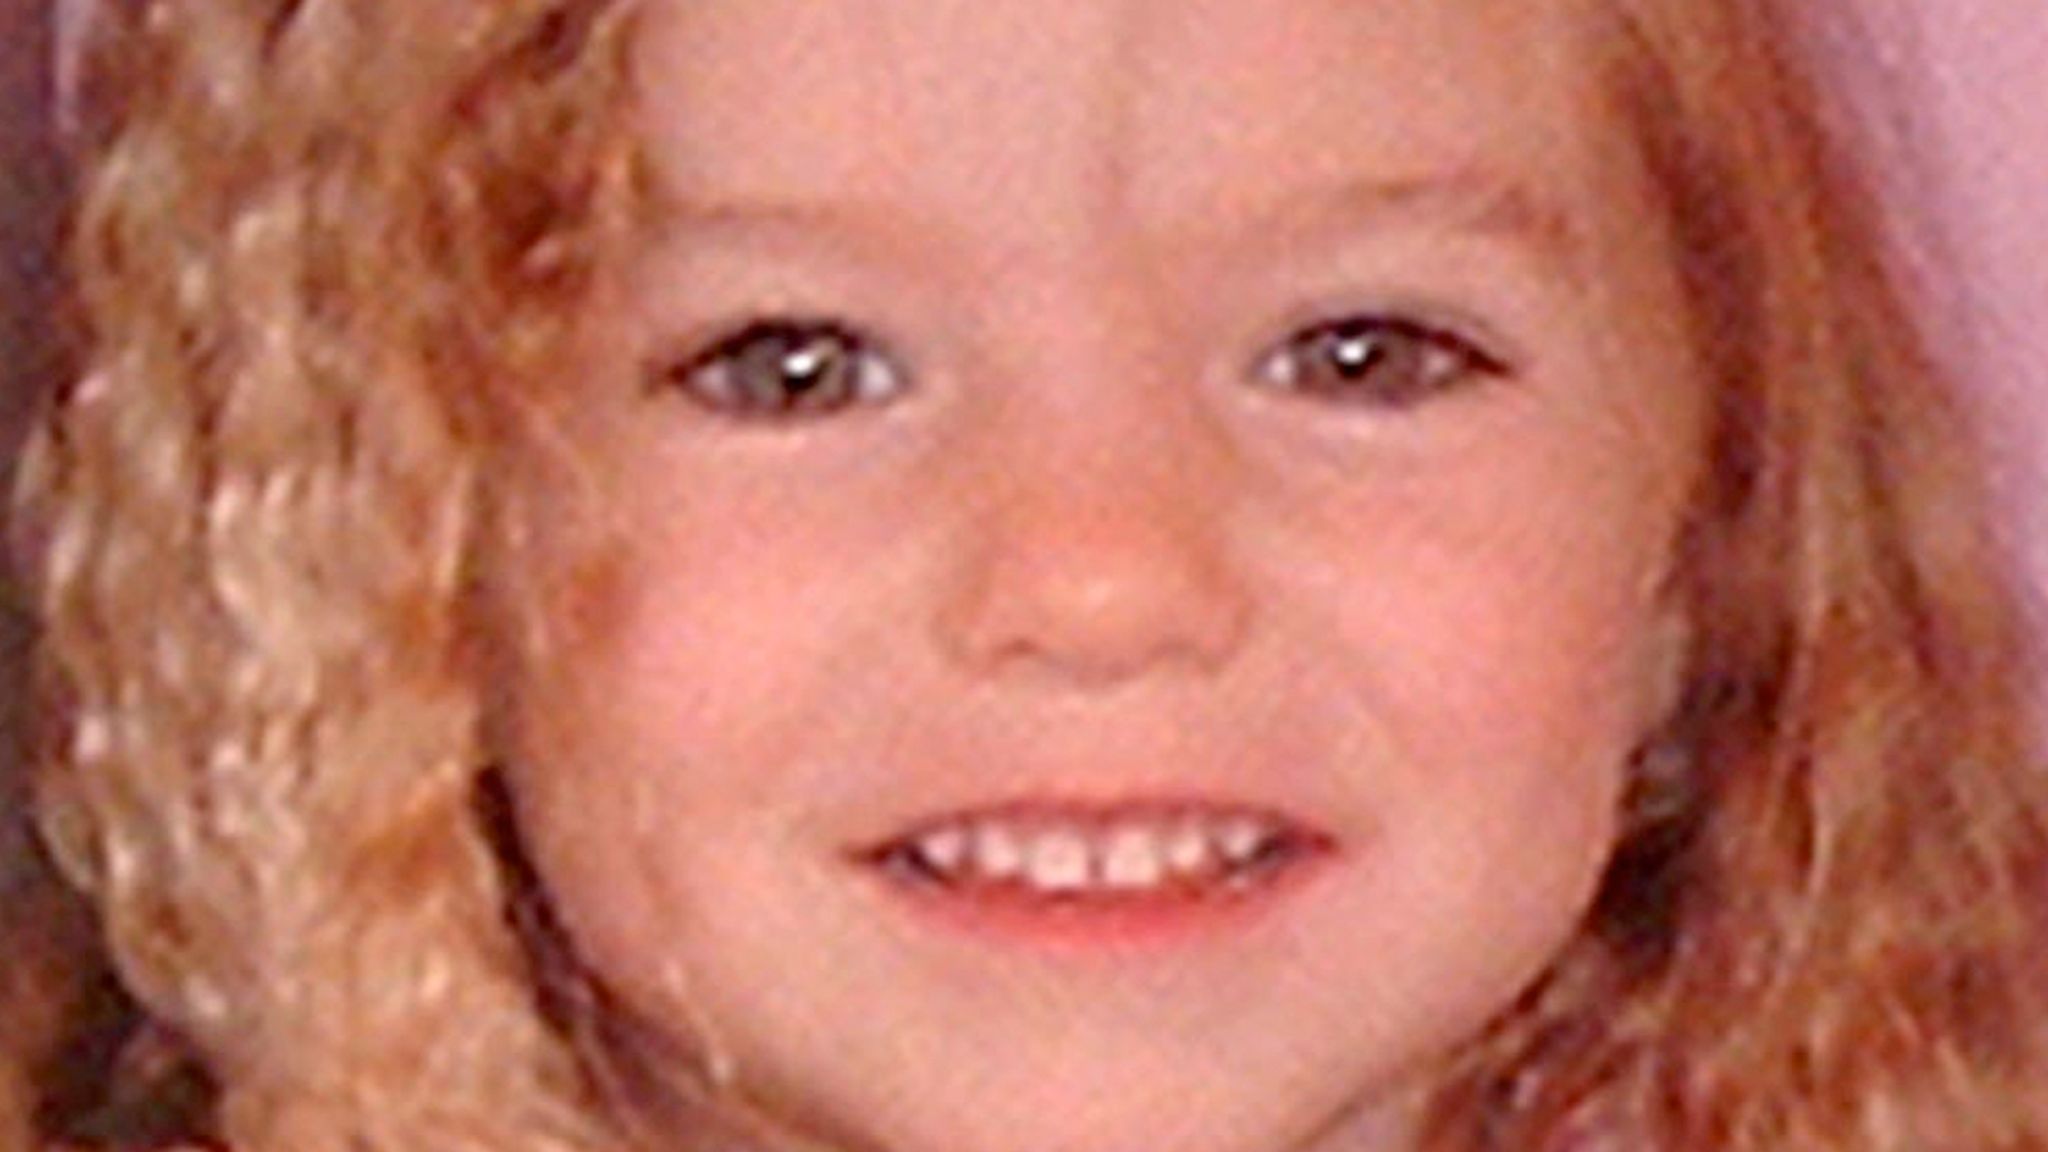 Madeleine McCann Prosecutor's letter to parents says there is